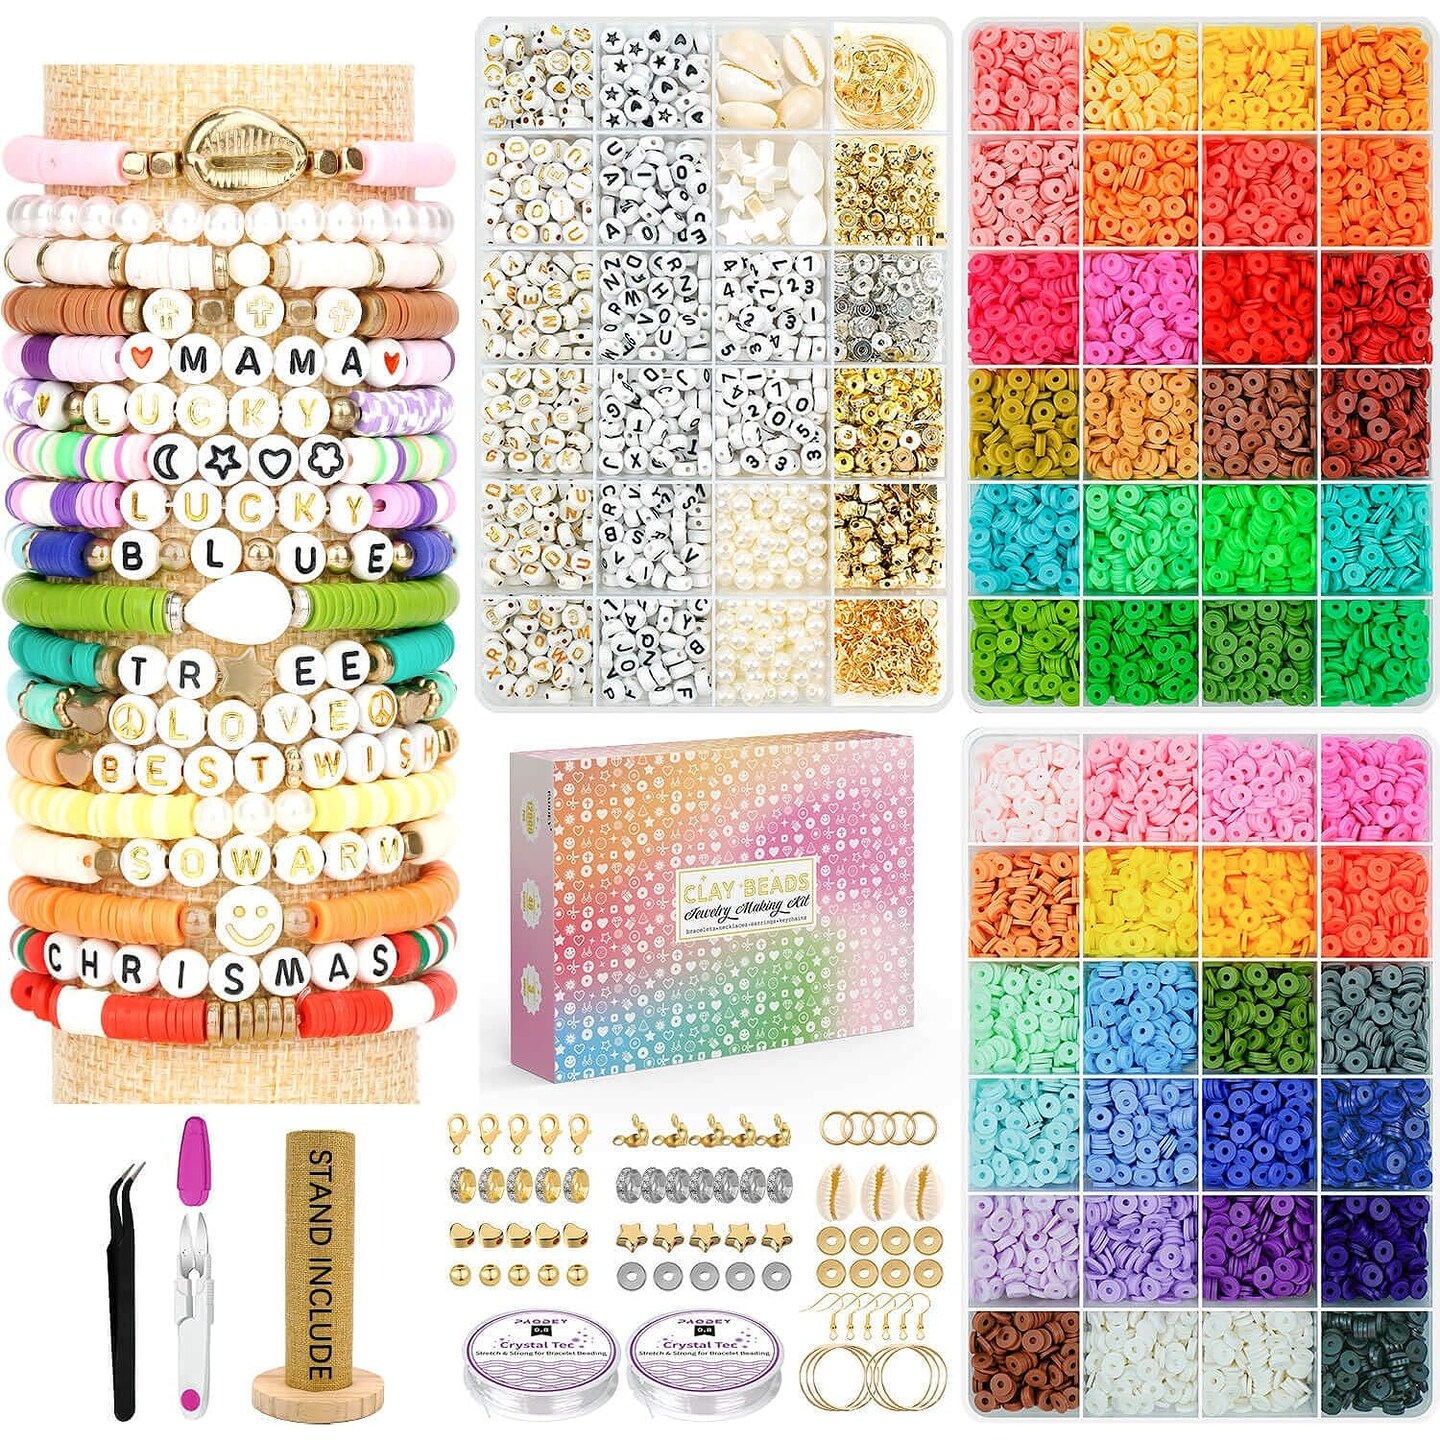 Friendship Bracelet Kit, 14,000Pcs 48 Colors Clay Beads Bracelet Making Kit With Holder Jewelry Maker With Number Letter Bead Silver Gold Spacer Bead Set Gift For Kids Teen Girls Crafts